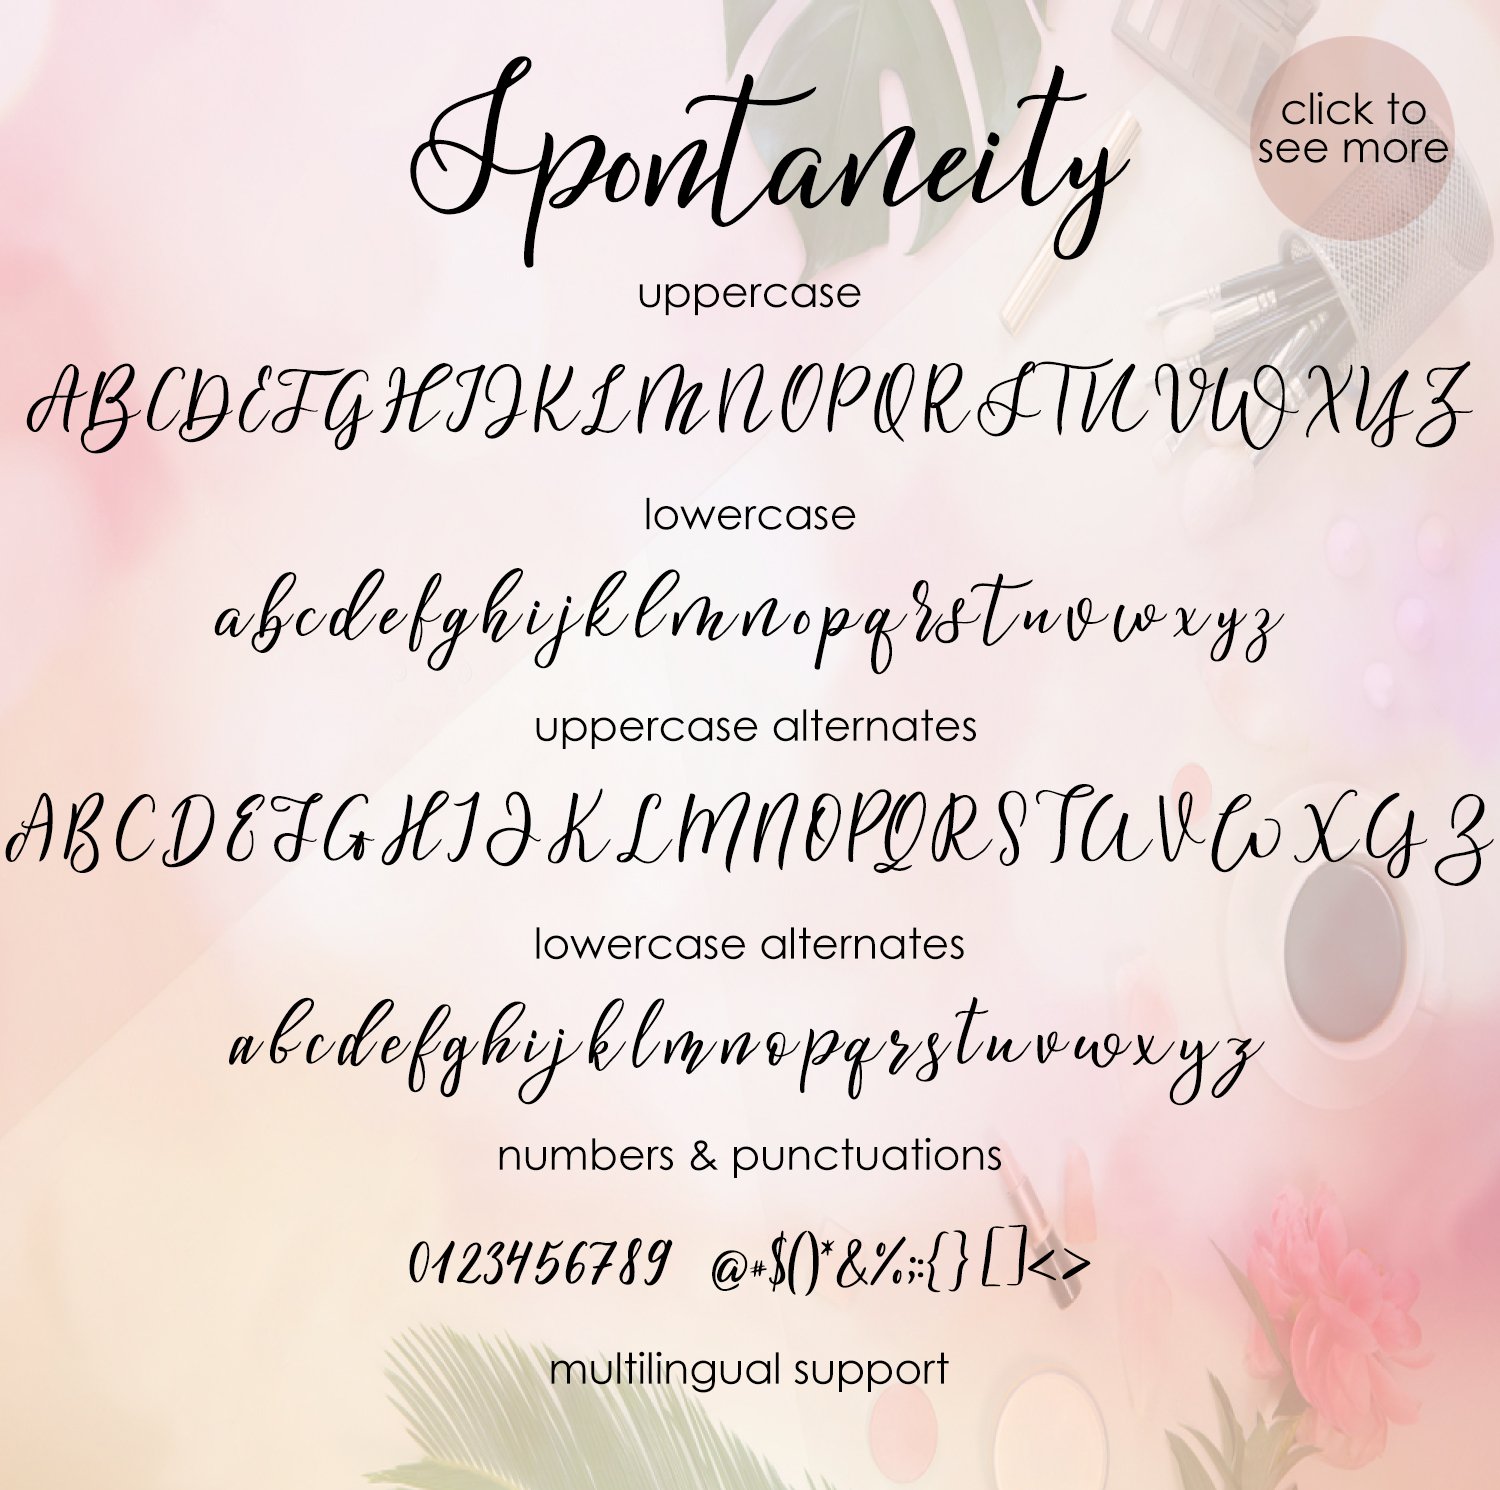 General view of the Spontaneity font.